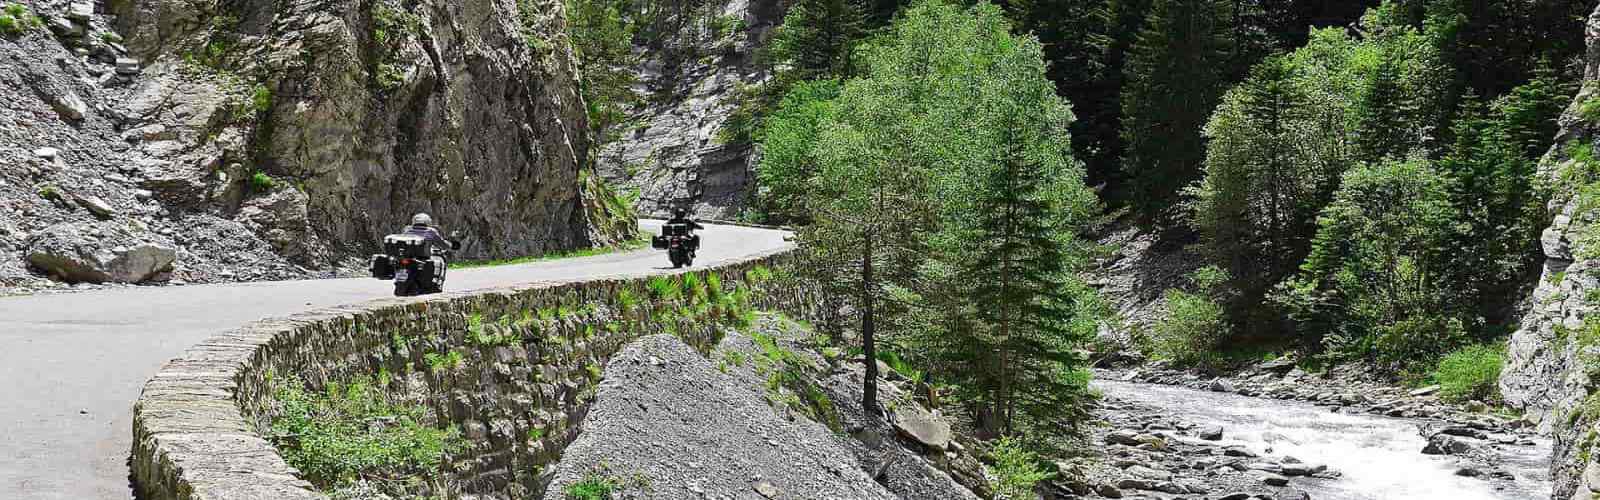 A scenic motorcycle ride in the heart of Los Picos of Europe